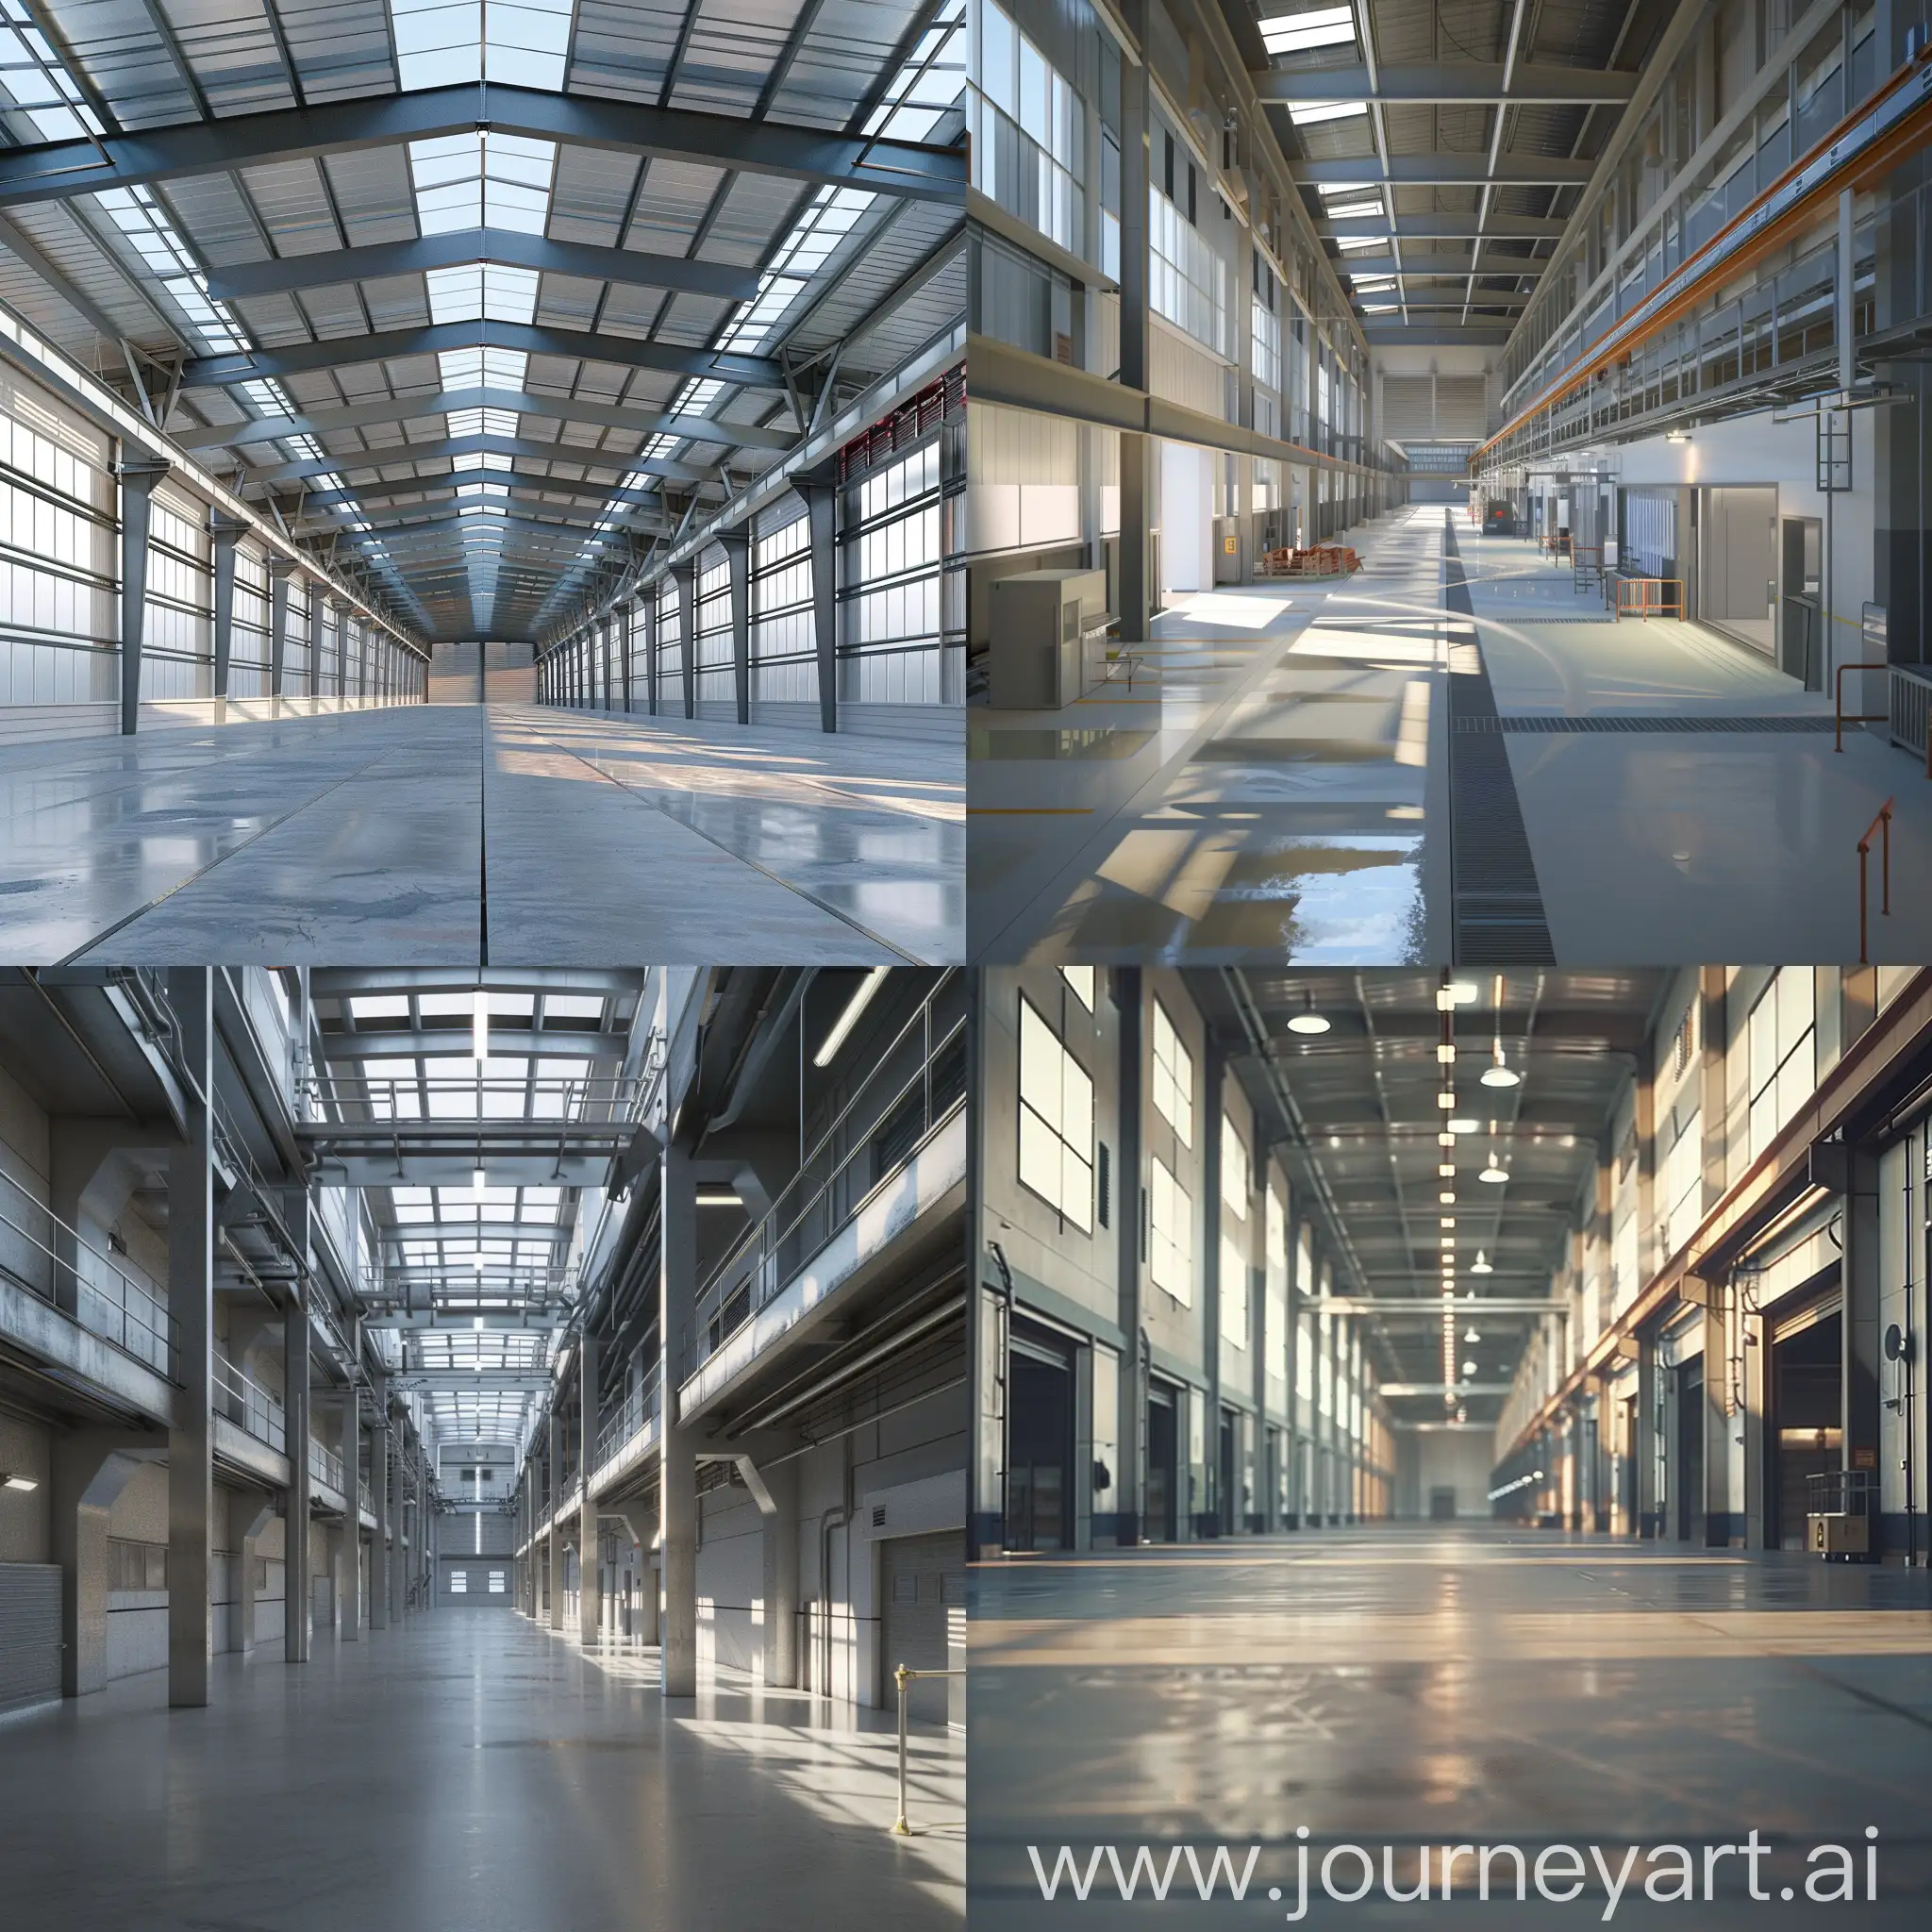 Photorealistic-Industrial-Hall-Spacious-50x25x10-Meter-Structure